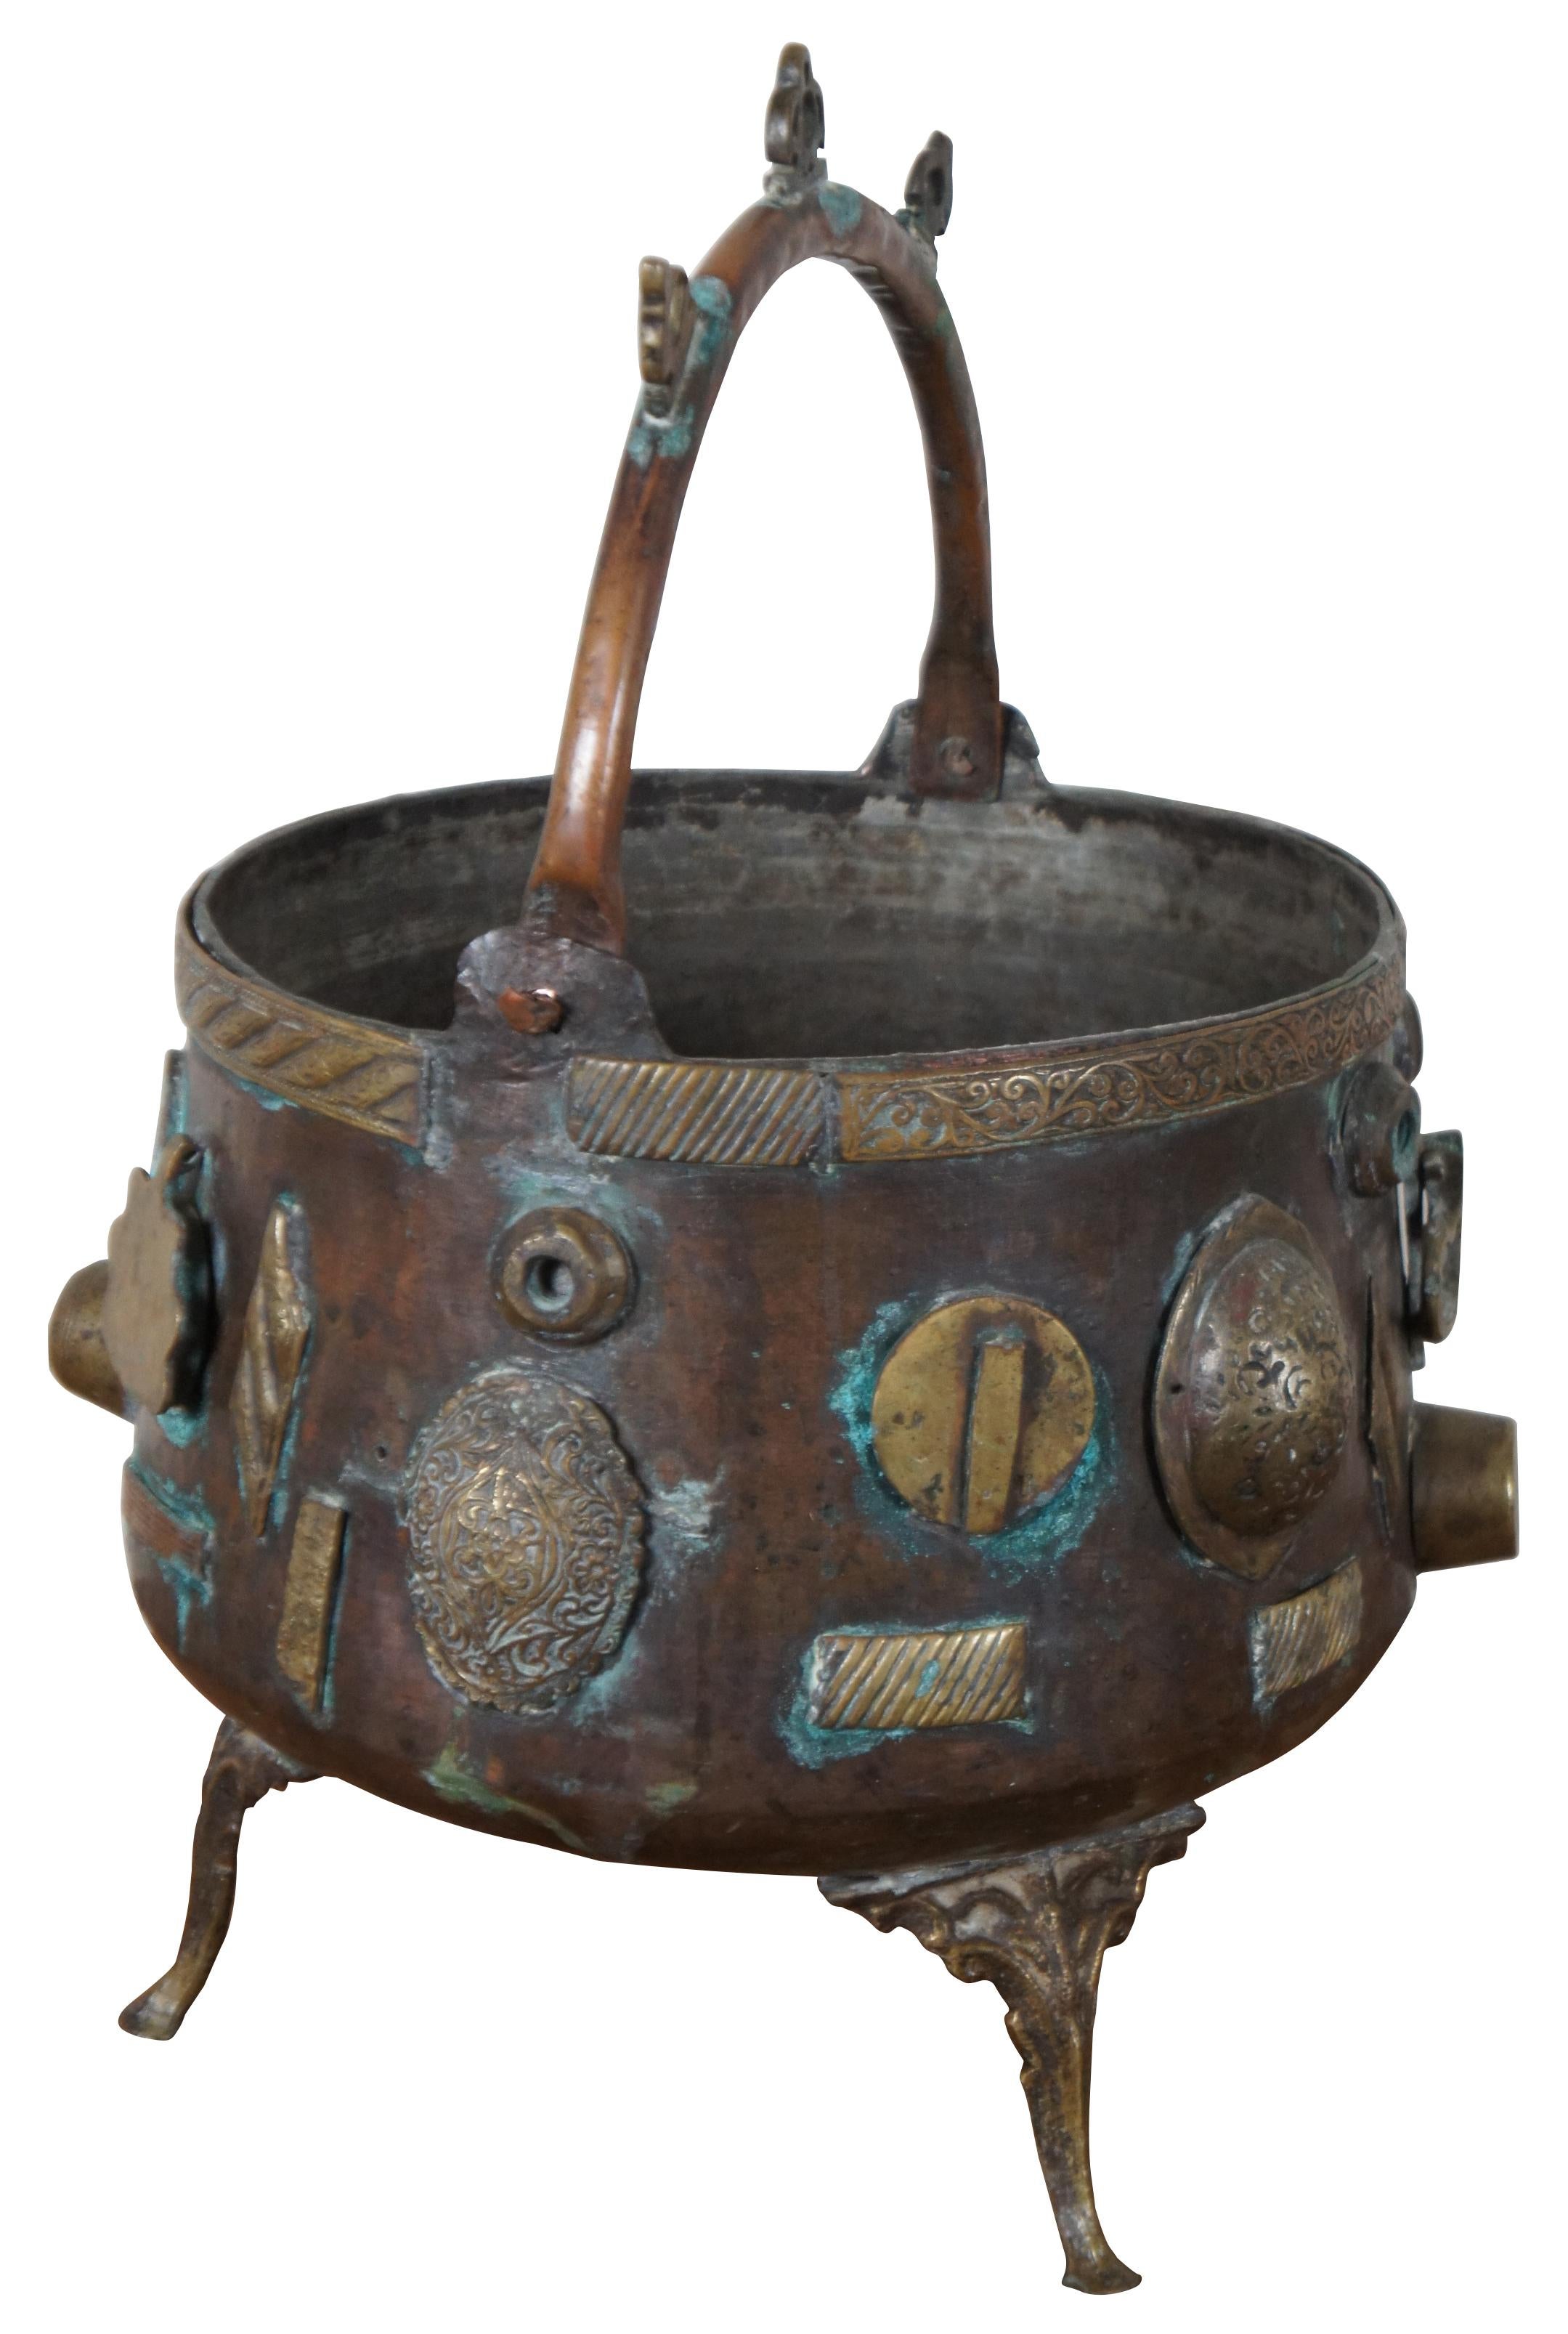 Antique bronze cauldron with tripod base and swivel handle, decorated with etched ornate medallions going along the body. Circa 19th century.

Provenance : Jerome Schottenstein Estate, Columbus Ohio. Jerome was was an American entrepreneur and